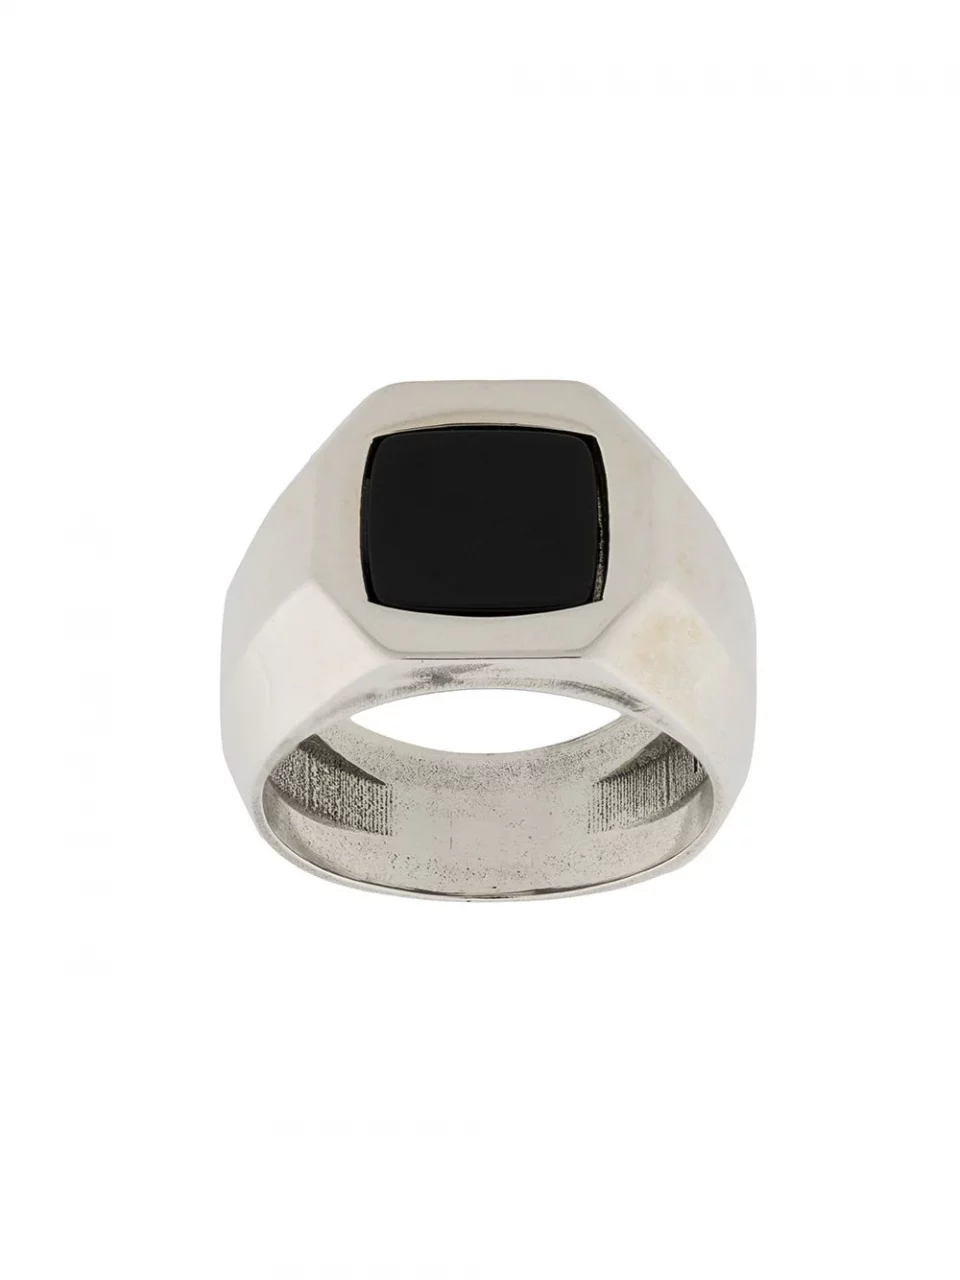 jewellery_reflections_com_bicocchi_silver_ring